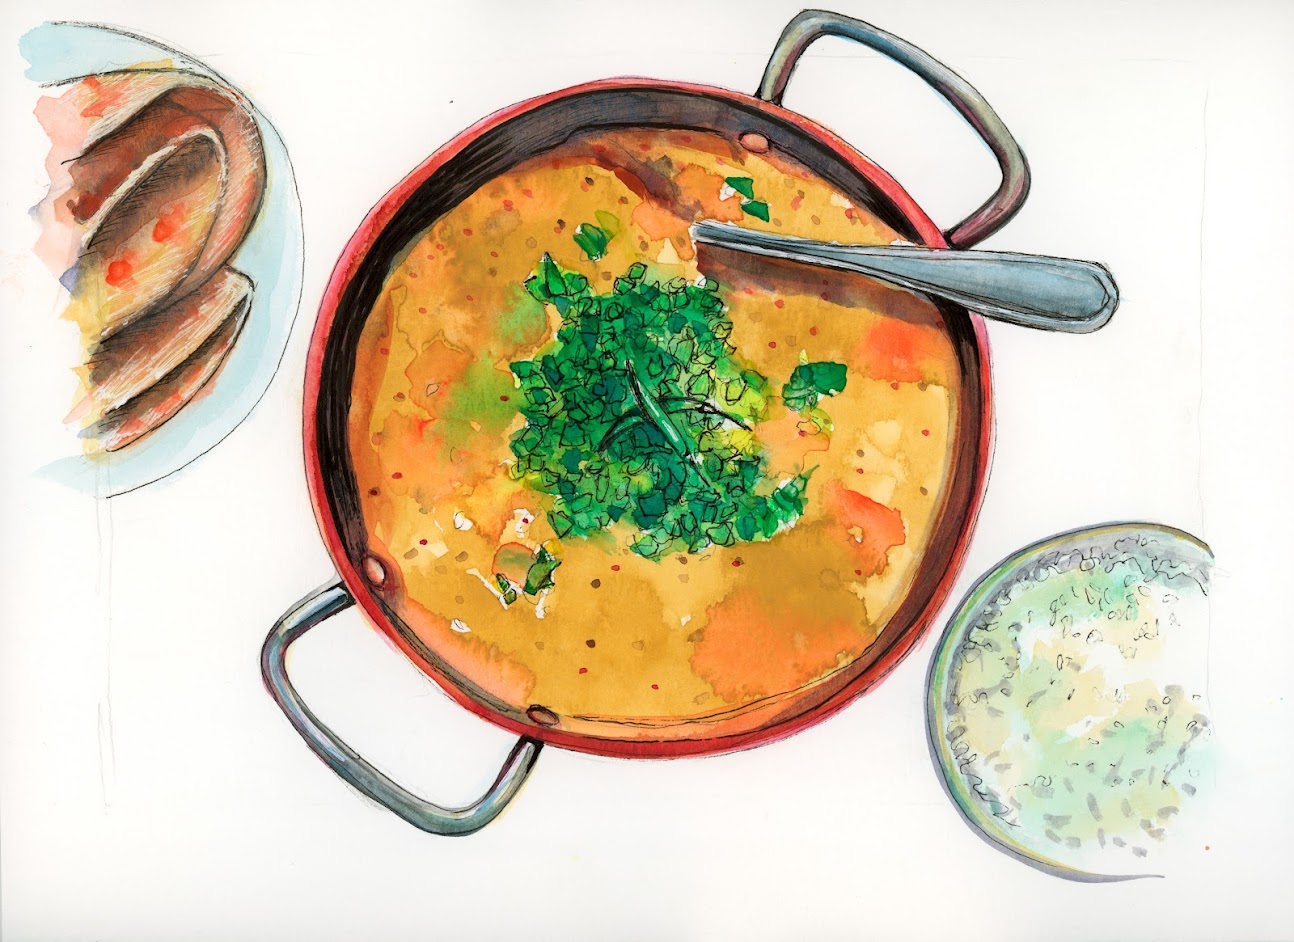 In the center of this hand-drawn illustration is a bowl full of red lentil daal garnished with coriander and chili peppers. It is served in a metal bowl with silver handles and a silver spoon is submerged in the daal. A cropped view of a bowl of rice is in the lower right-hand corner and a cropped view of a plate of paratha is in the upper left-hand corner.